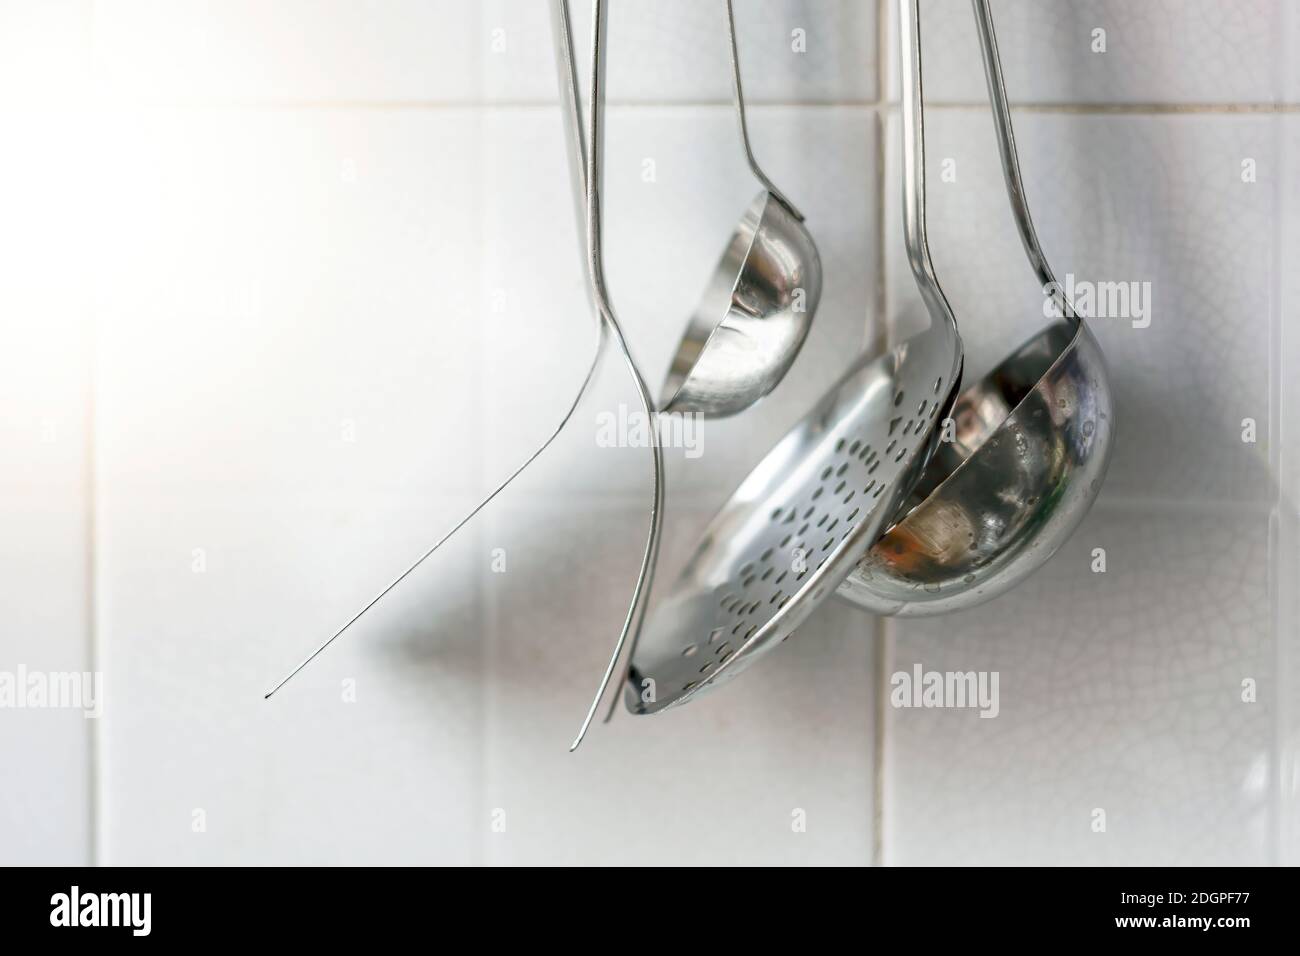 A skimmer, two forks and two metal ladles hanging on the tiled kitchen wall. Metal kitchen utensils Stock Photo